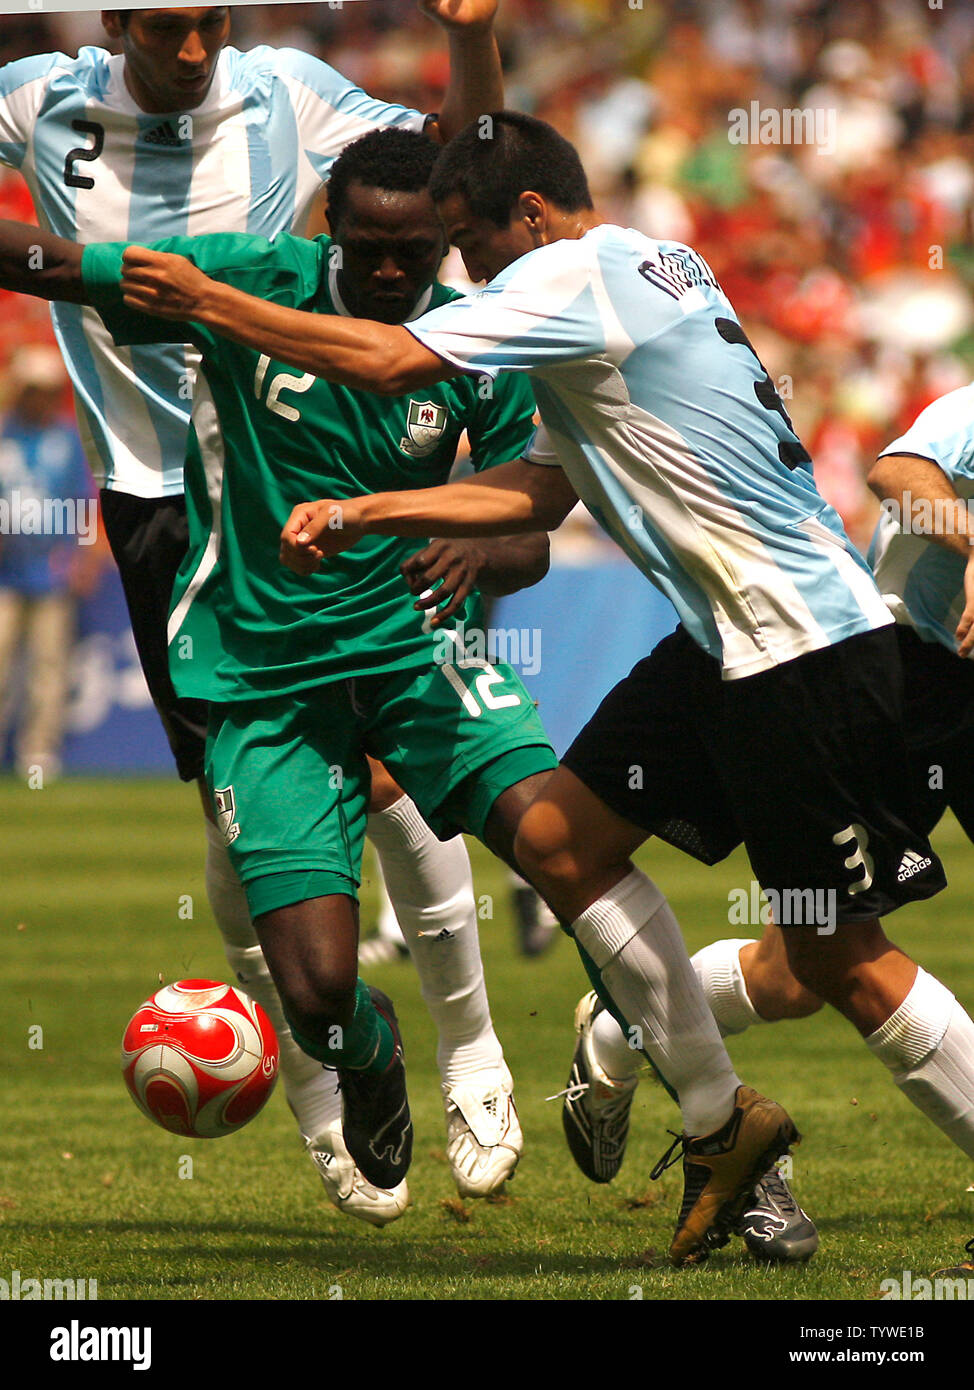 Argentina's Ezequiel Garay (L) and teammate Luciano Monzon (R) try to steal the ball from Nigeria's Ebenezer Ajilore during the men's football final in the Beijing 2008 Olympic Games August 23, 2008.  Argentina won 1-0 for the gold, while Nigeria settled for the silver and Brazil the bronze.  (UPI Photo/Stephen Shaver) Stock Photo